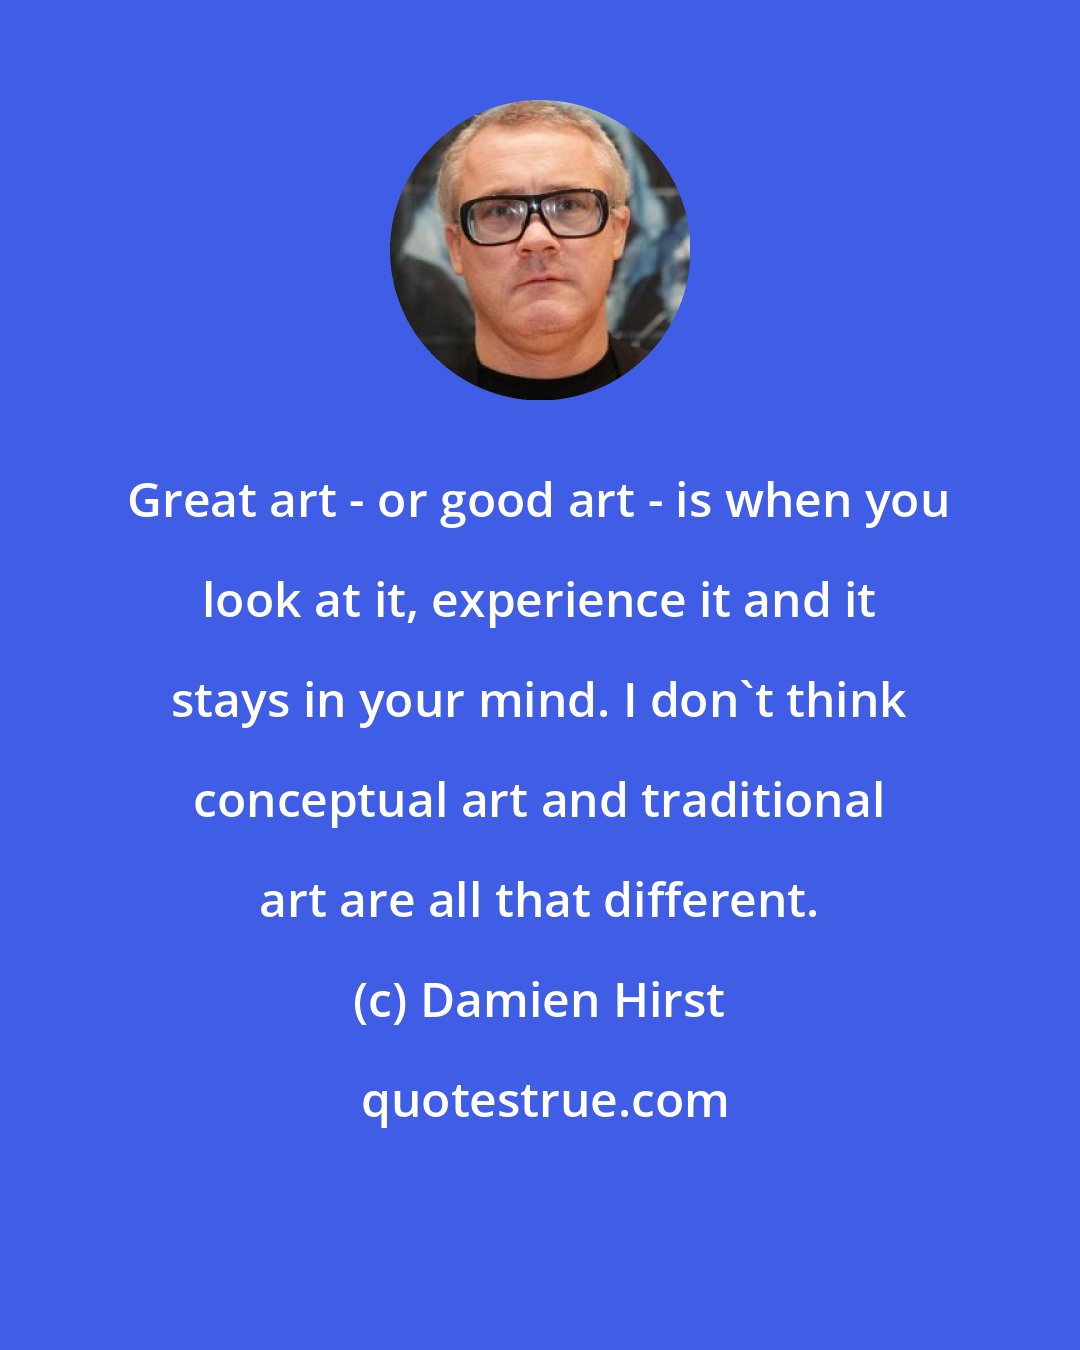 Damien Hirst: Great art - or good art - is when you look at it, experience it and it stays in your mind. I don't think conceptual art and traditional art are all that different.